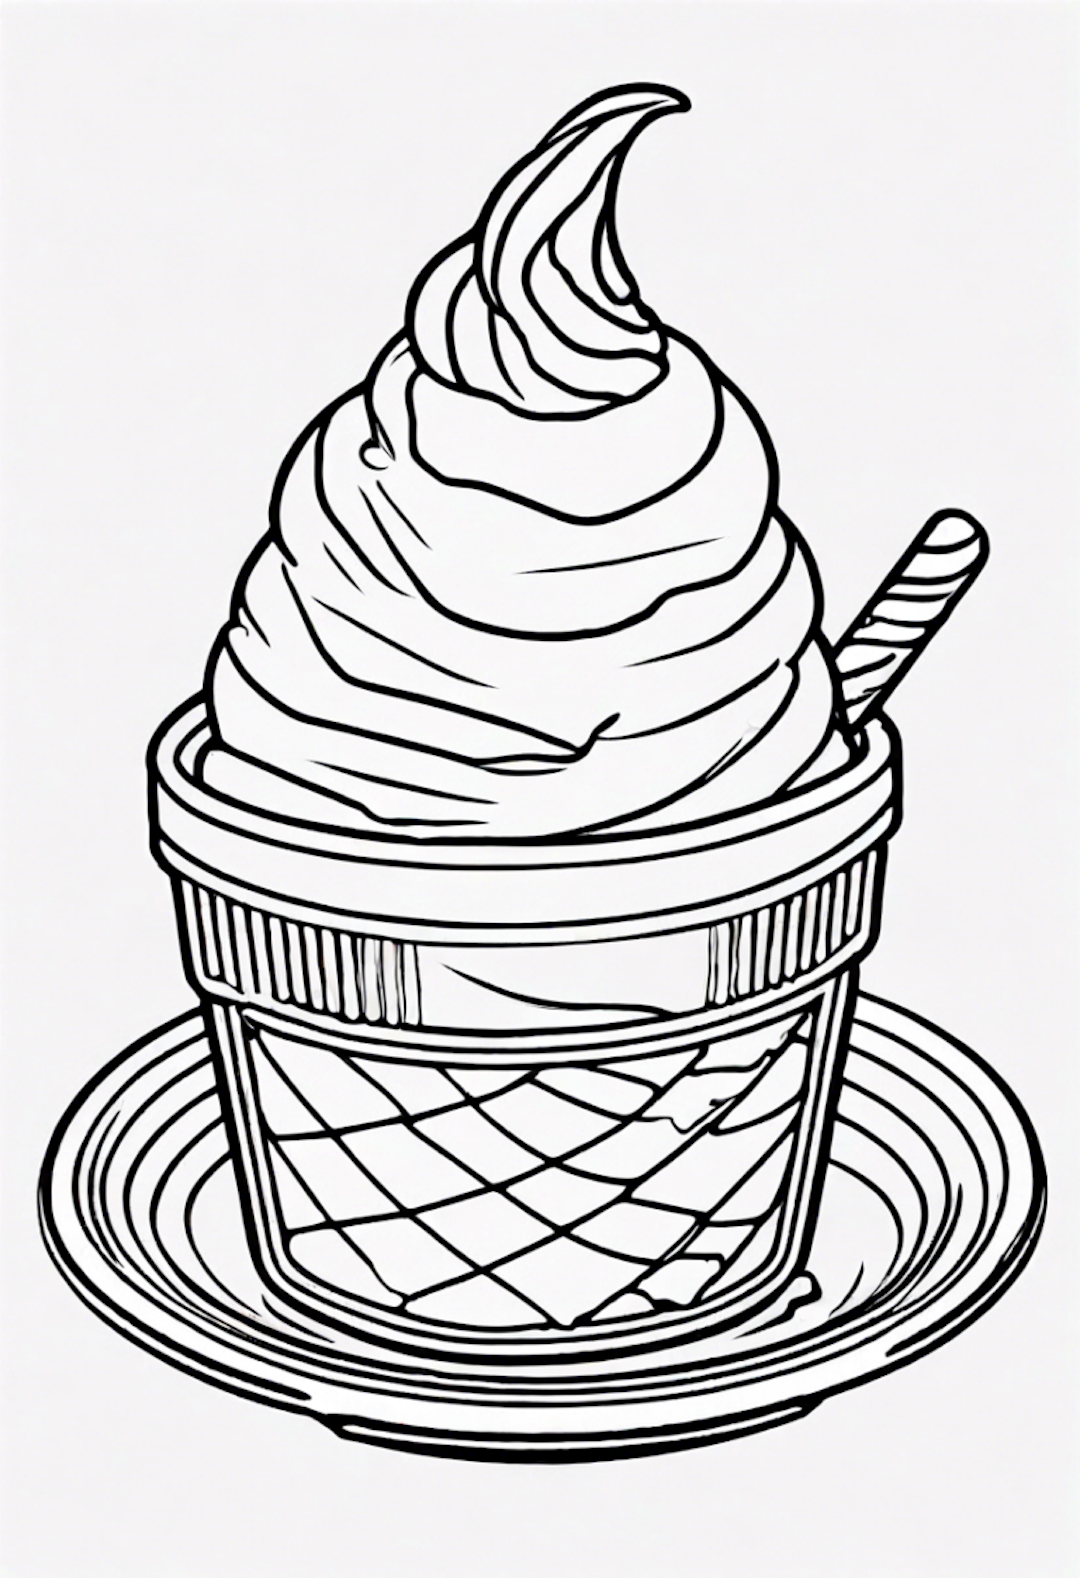 Ice Cream Delight Coloring Page coloring pages